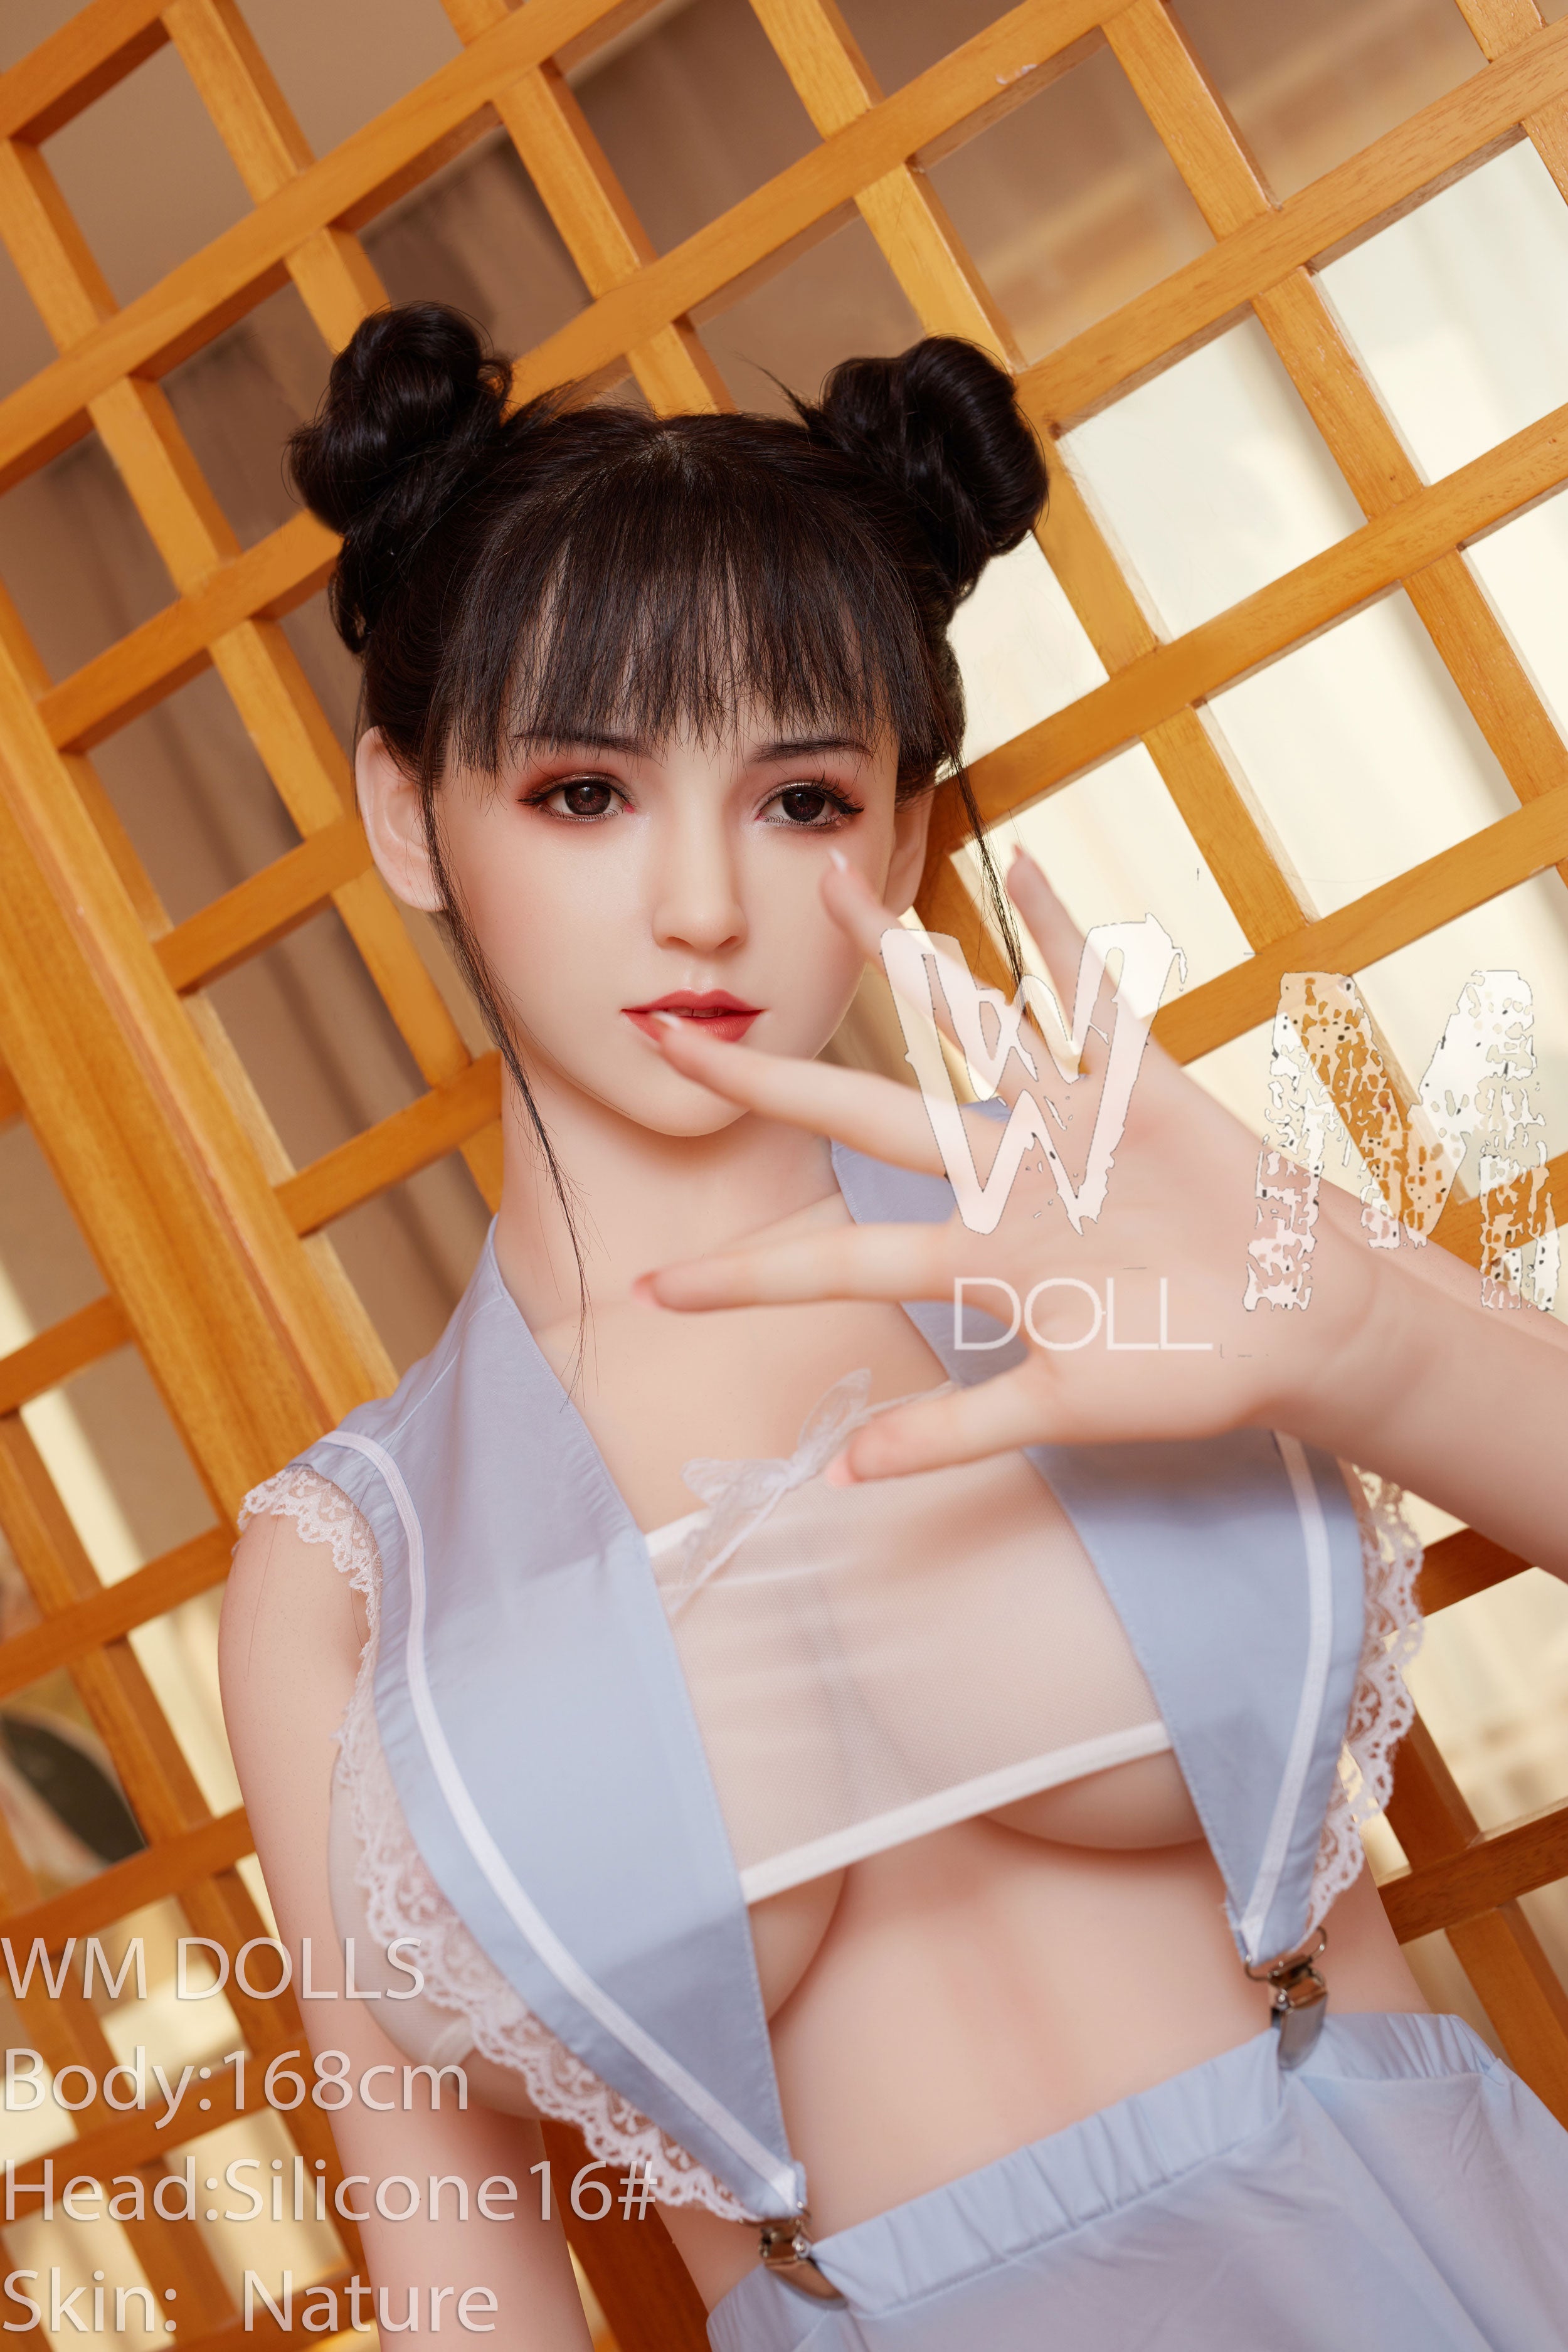 Katana Japanese Housewife Sex Doll image picture